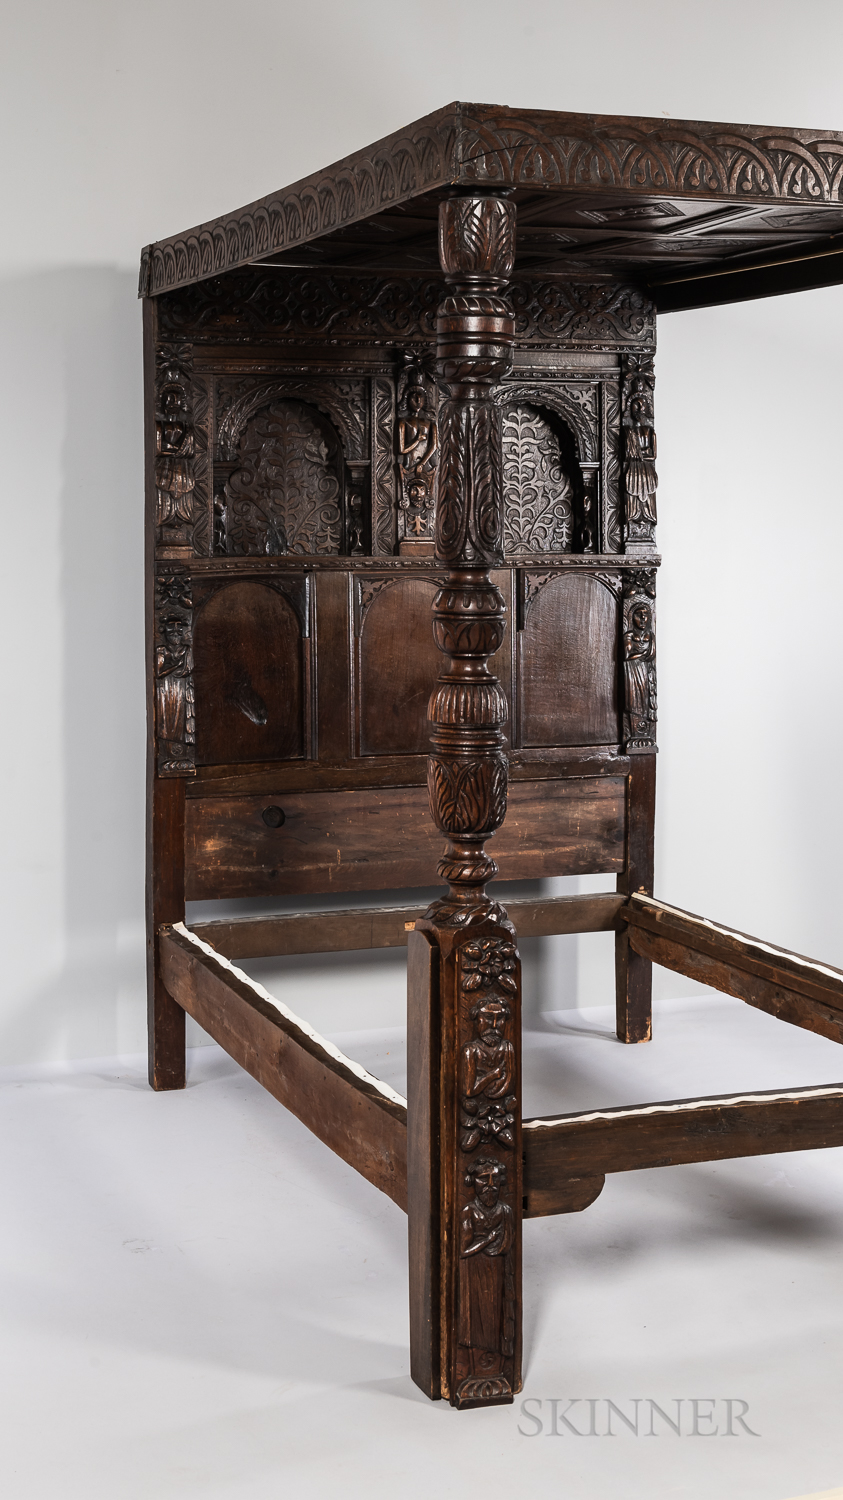 Jacobean-style Carved Oak Tester Bed - Image 7 of 8